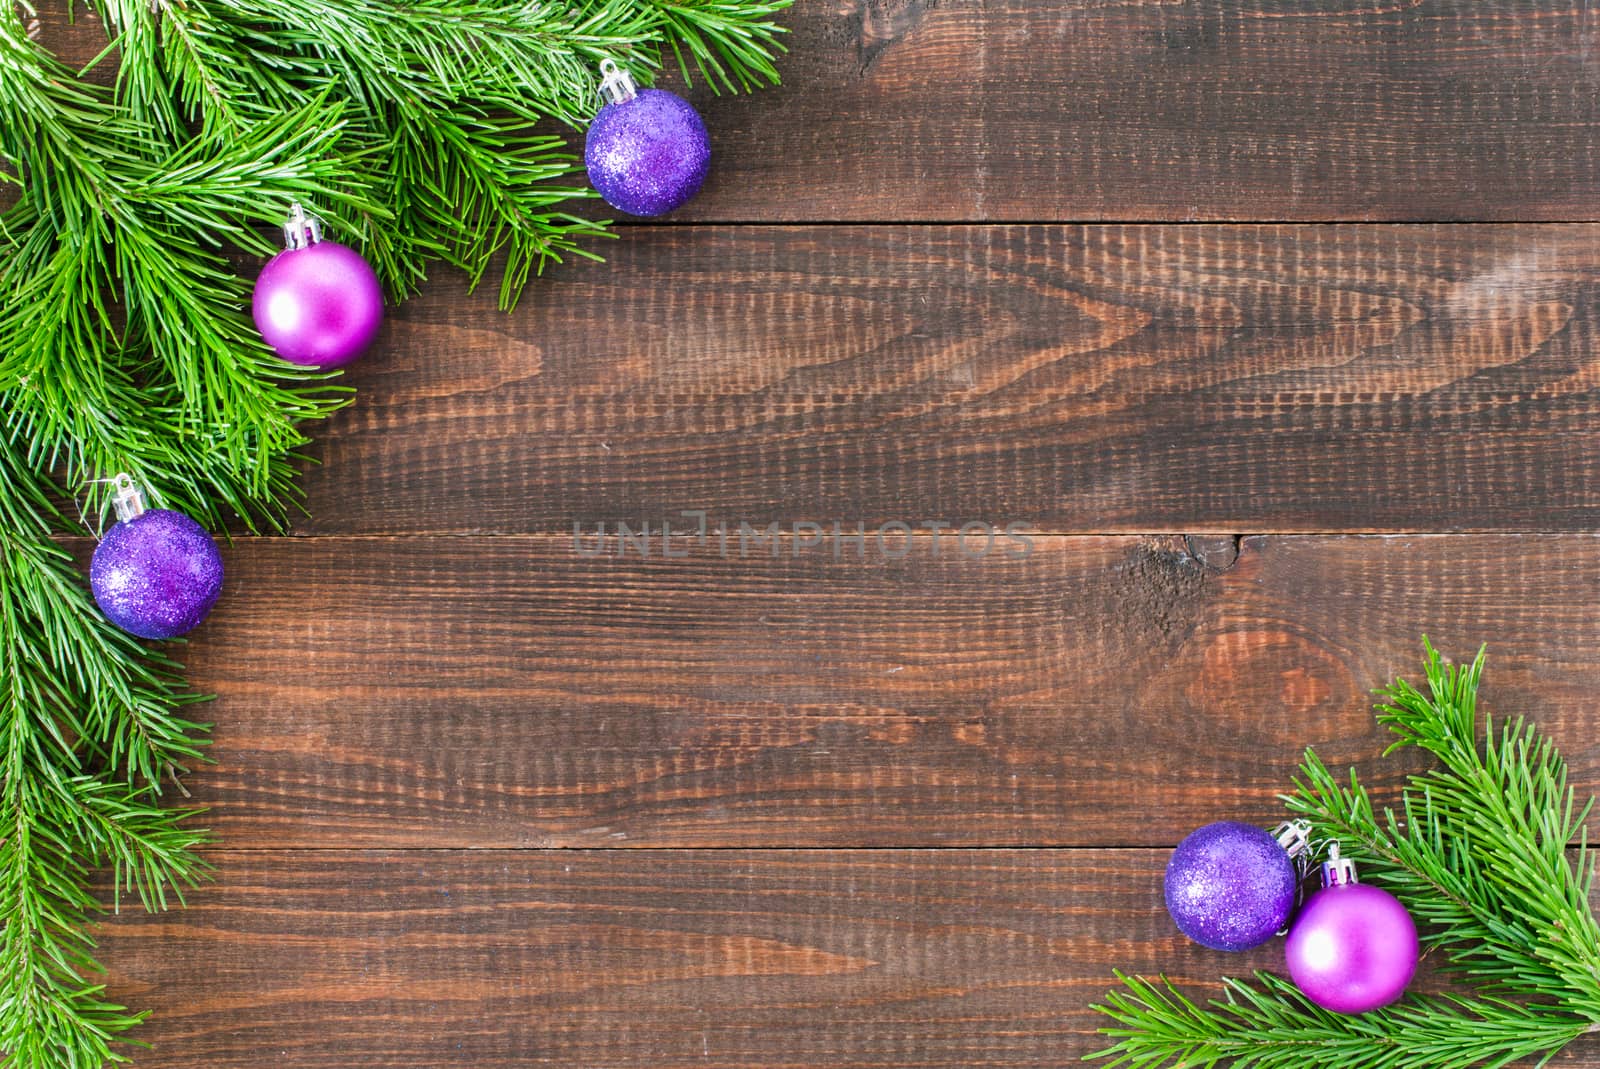 Christmas fir tree with decoration on dark wooden board background. Border art design with Christmas tree and purple baubles. Xmas and new year concept with copy space